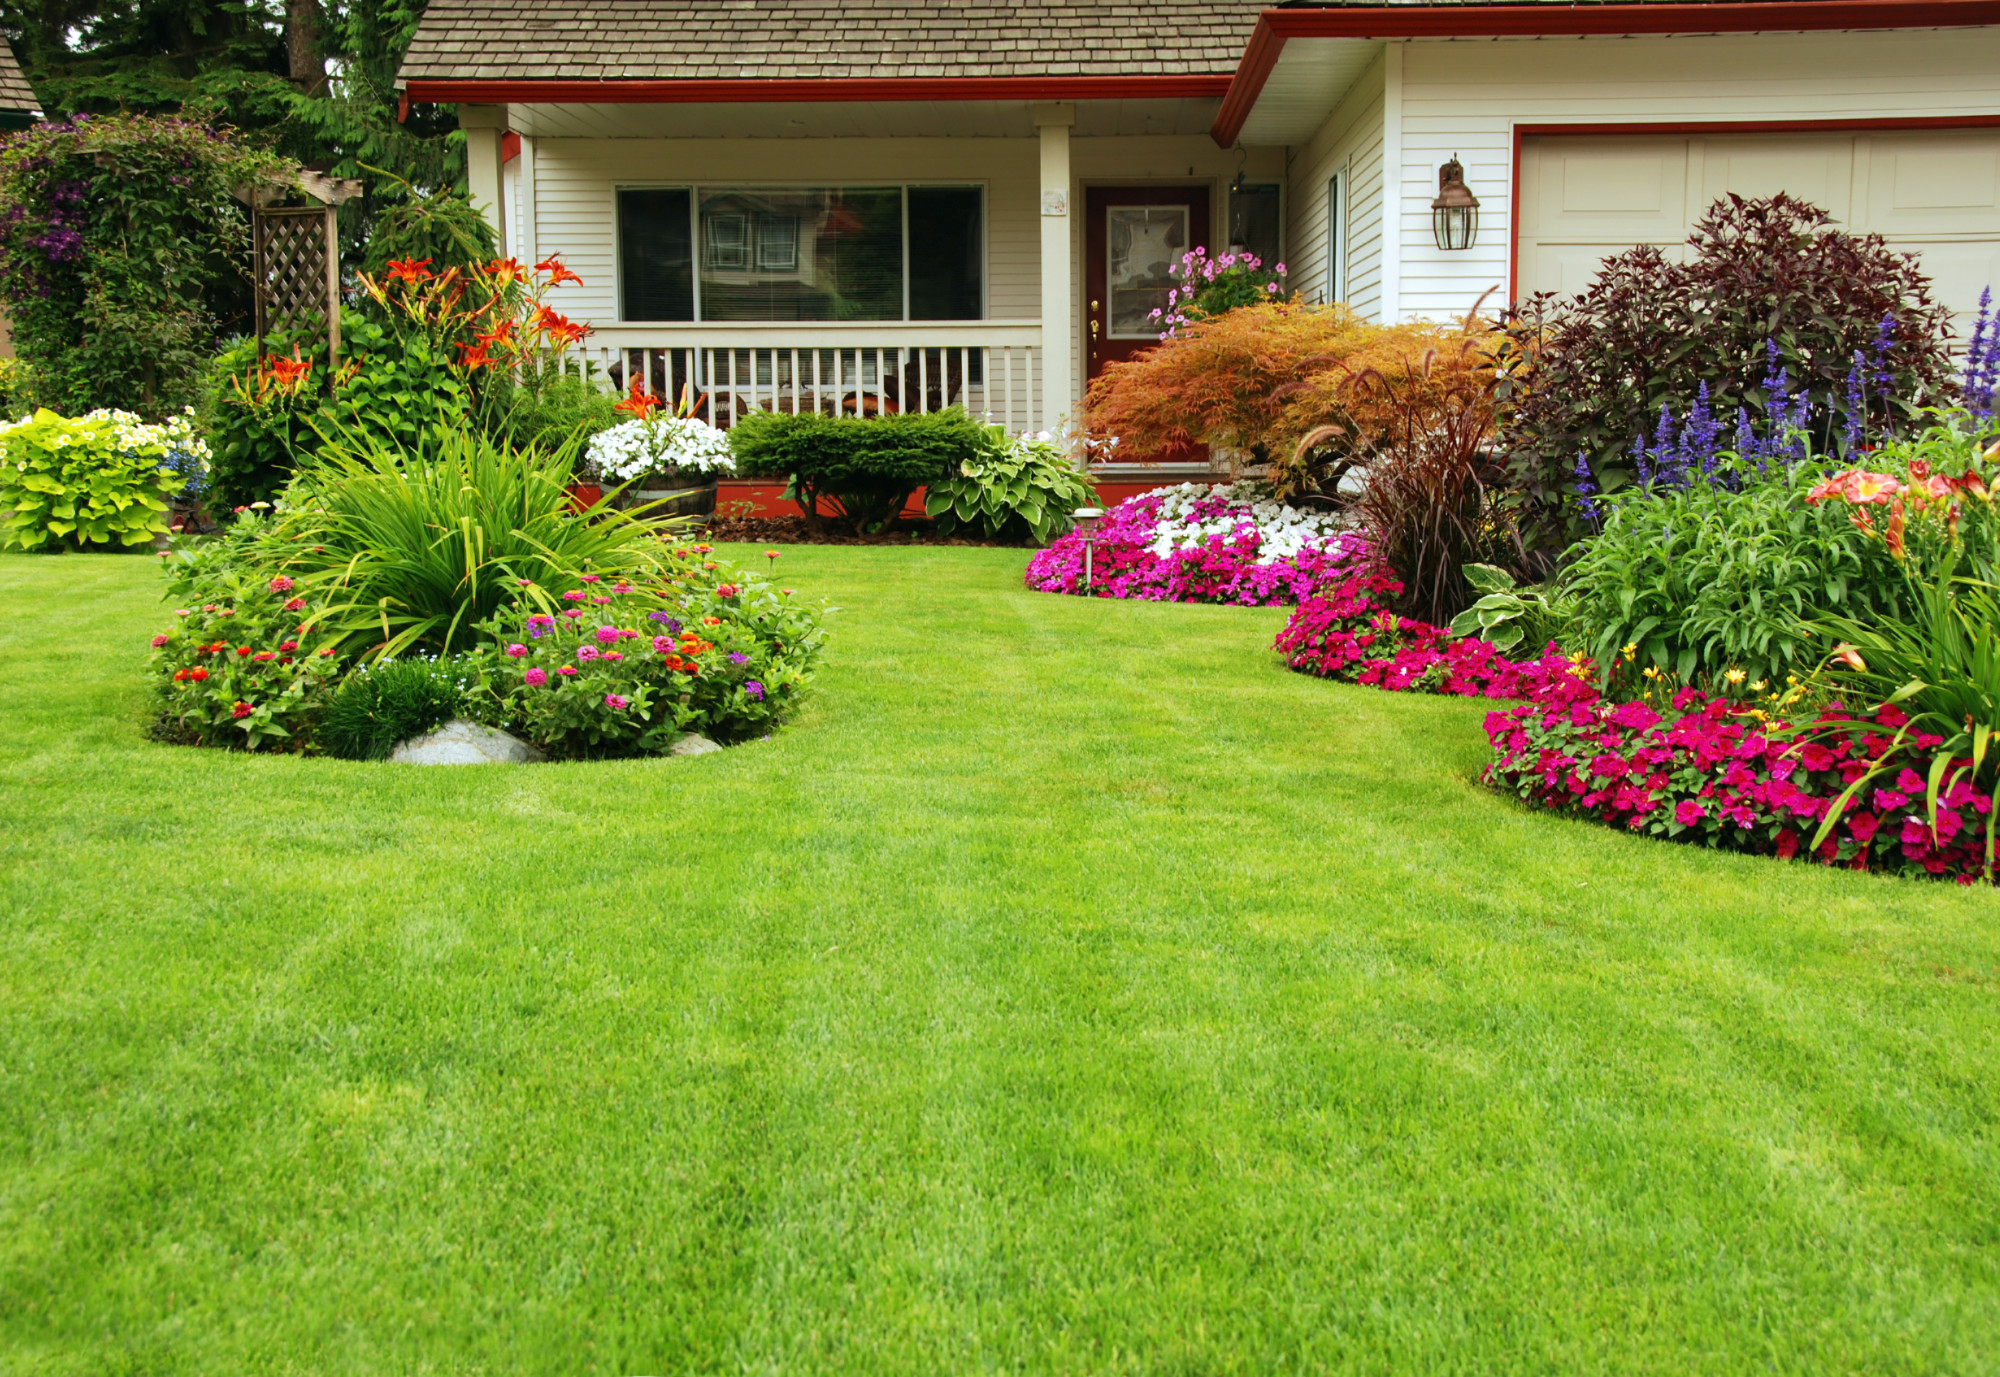 In order to have a green lawn, there are several things you need to do. Check out this guide for some of our greatest tips.